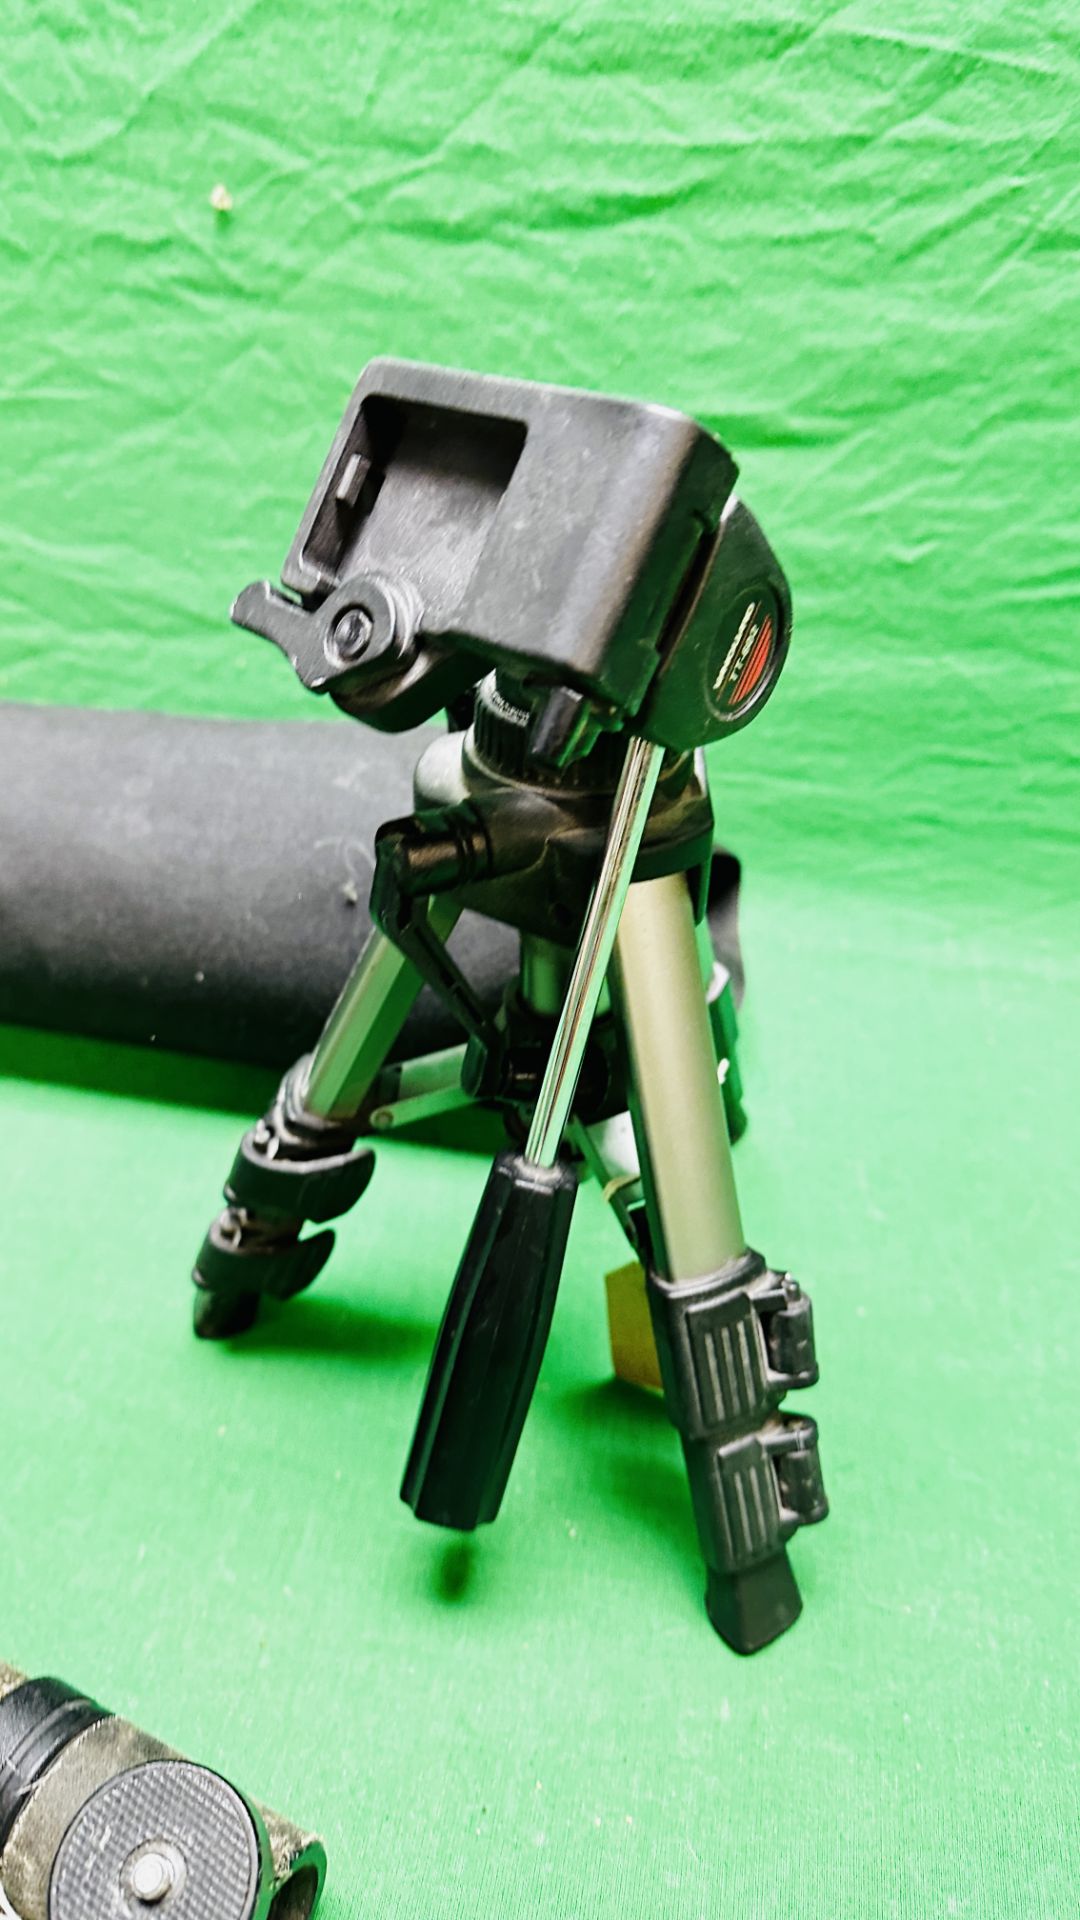 A MIRUDOR SPOTTING SCOPE COMPLETE WITH TRIPOD, CARRY CASE AND MONOPOD STICK. - Image 8 of 8